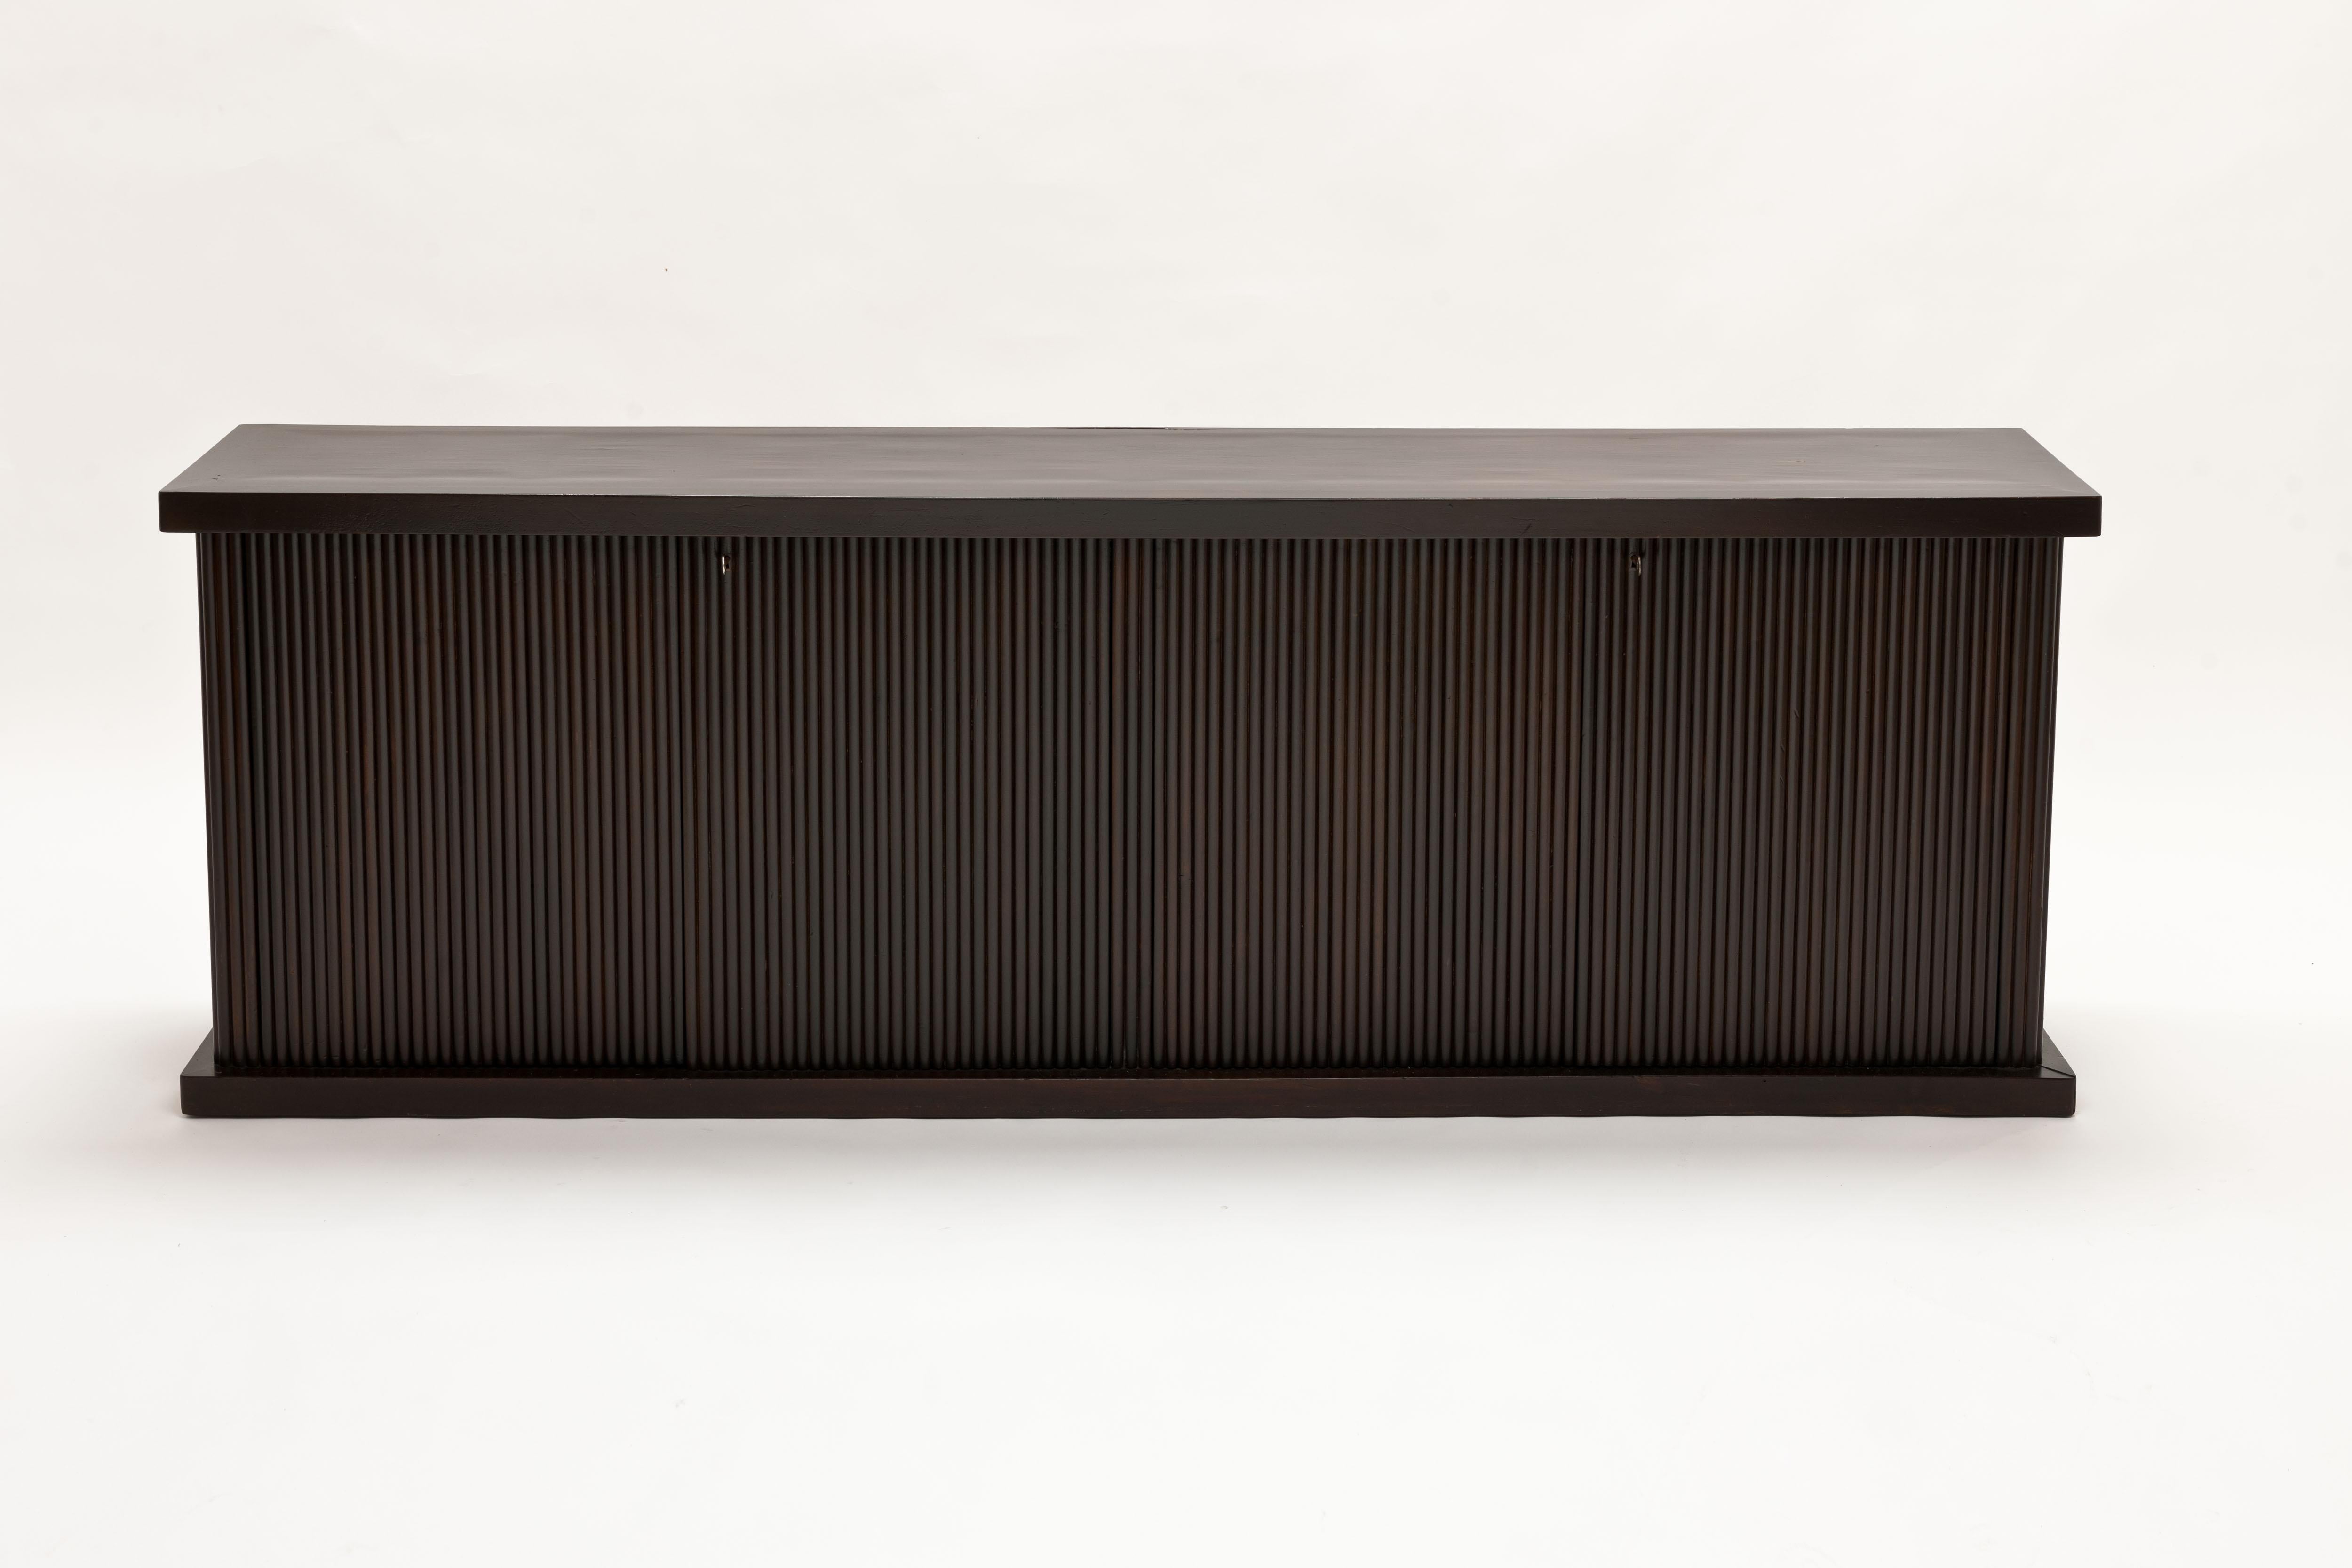 Minimalistic credenza with corrugated panelling by Italian 'Galleria Mobili D’arte Cantù', attributed design by 'Vittorio Dassi' who designed furnishing for Cantù with the exact same corrugated panels.
The credenza comes with two smaller drawers